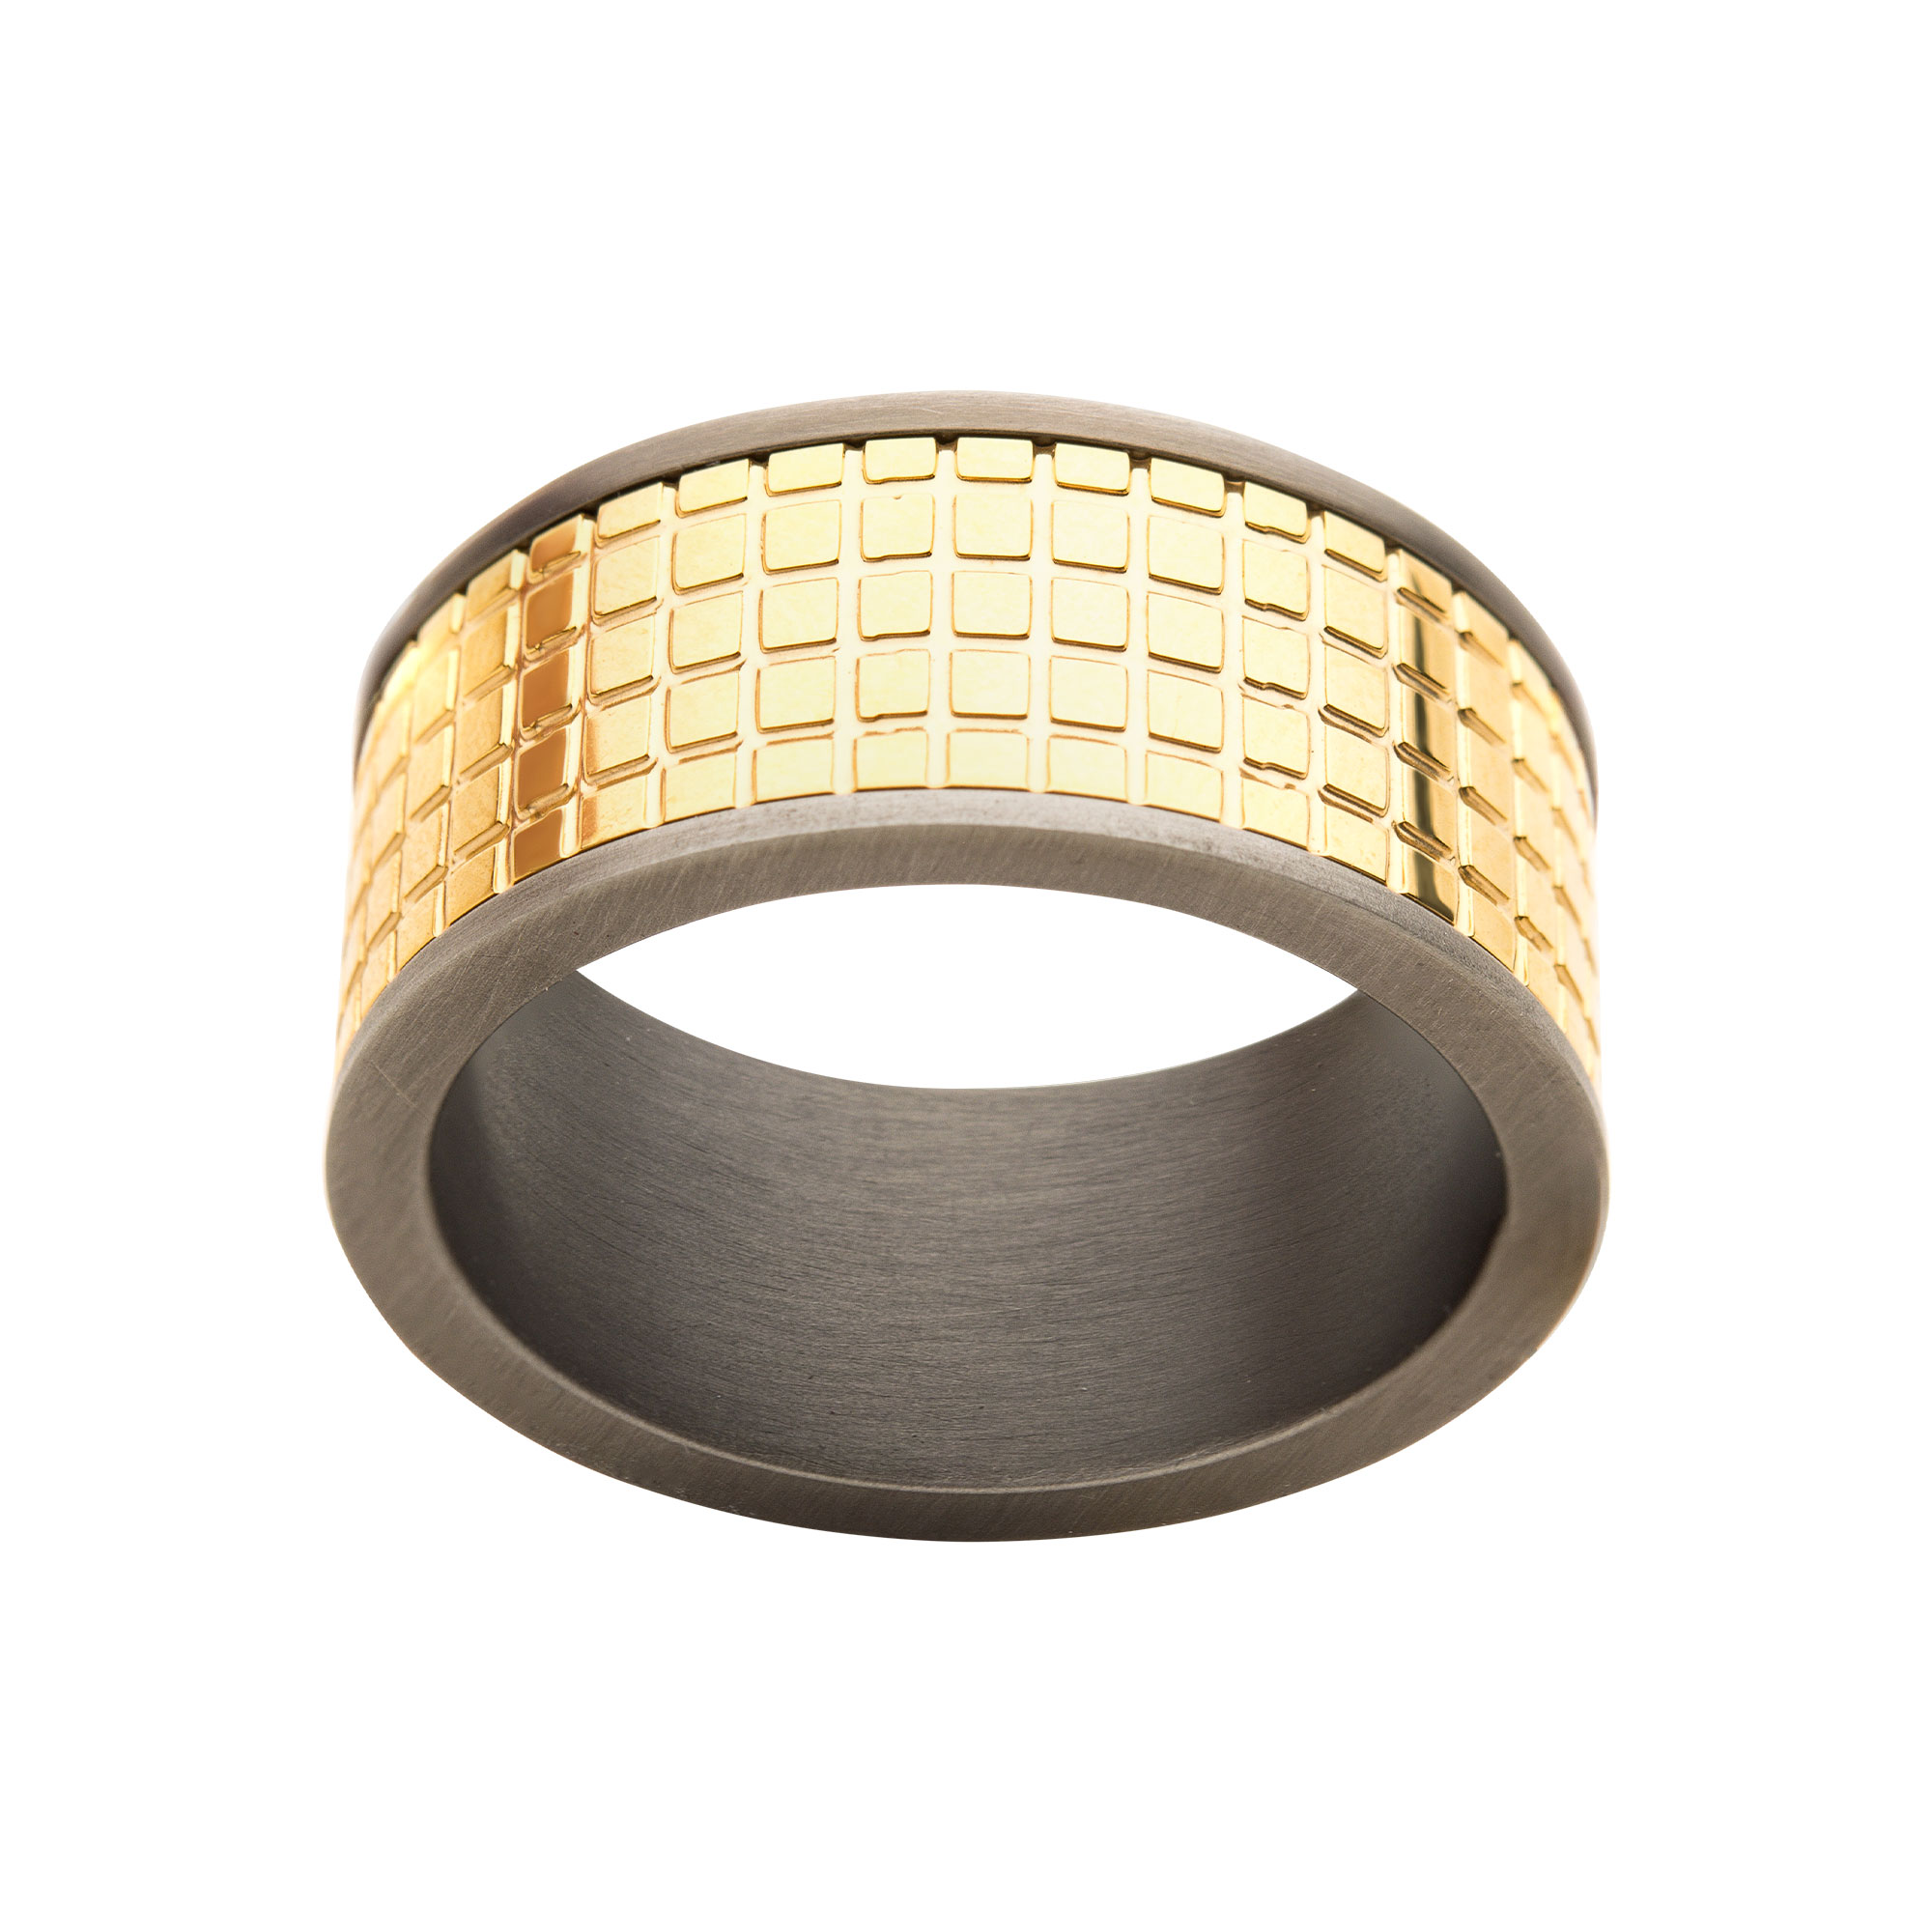 Gun Metal Plated with 18K Gold Plated Grid Inlay Ring Image 2 Selman's Jewelers-Gemologist McComb, MS